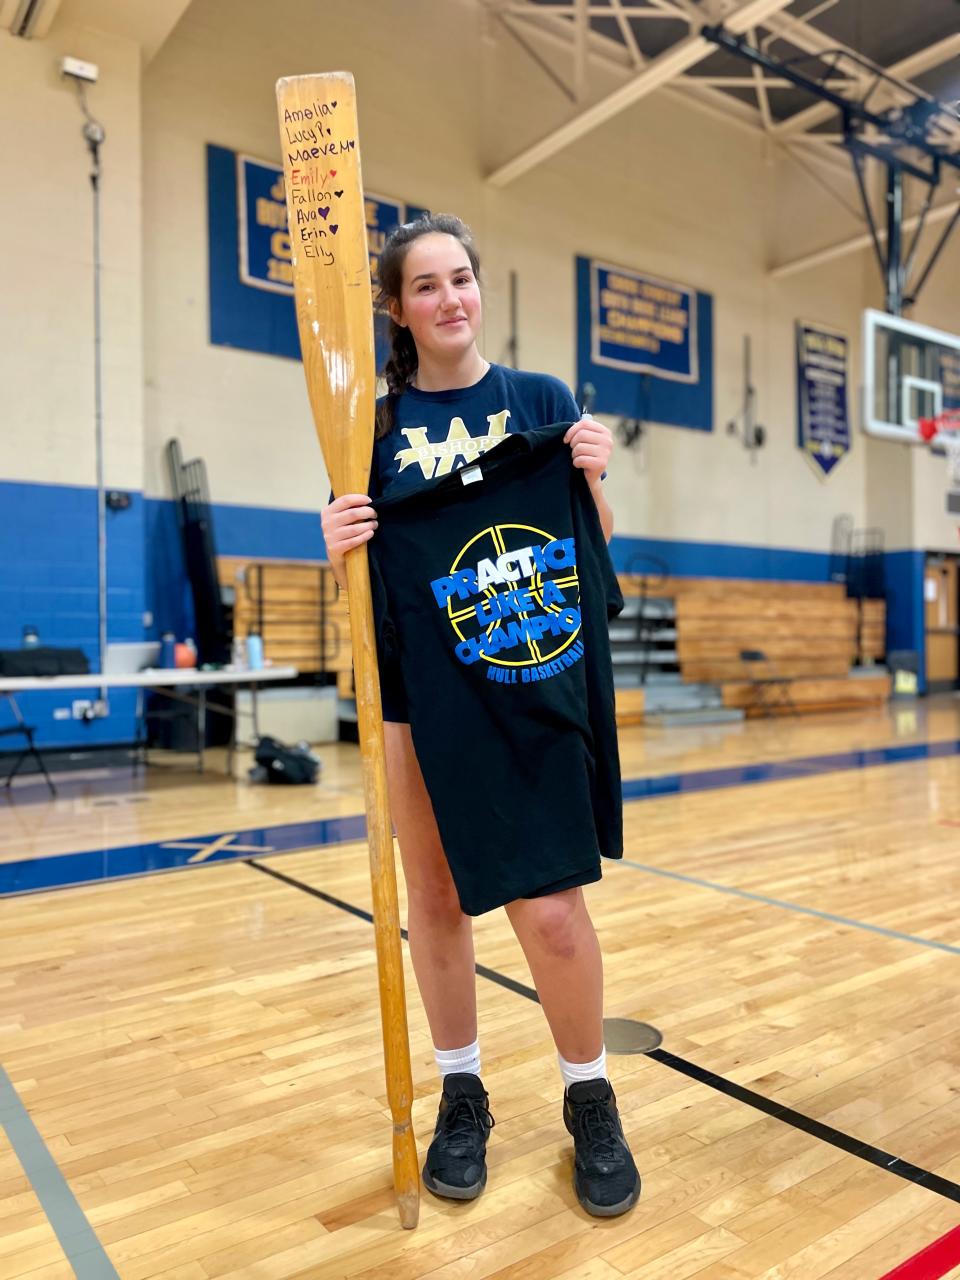 Week 8 player of the week Elly Thomas earned her spot on the Golden Oar and snagged the Hull basketball practice makes champions T-shirt.